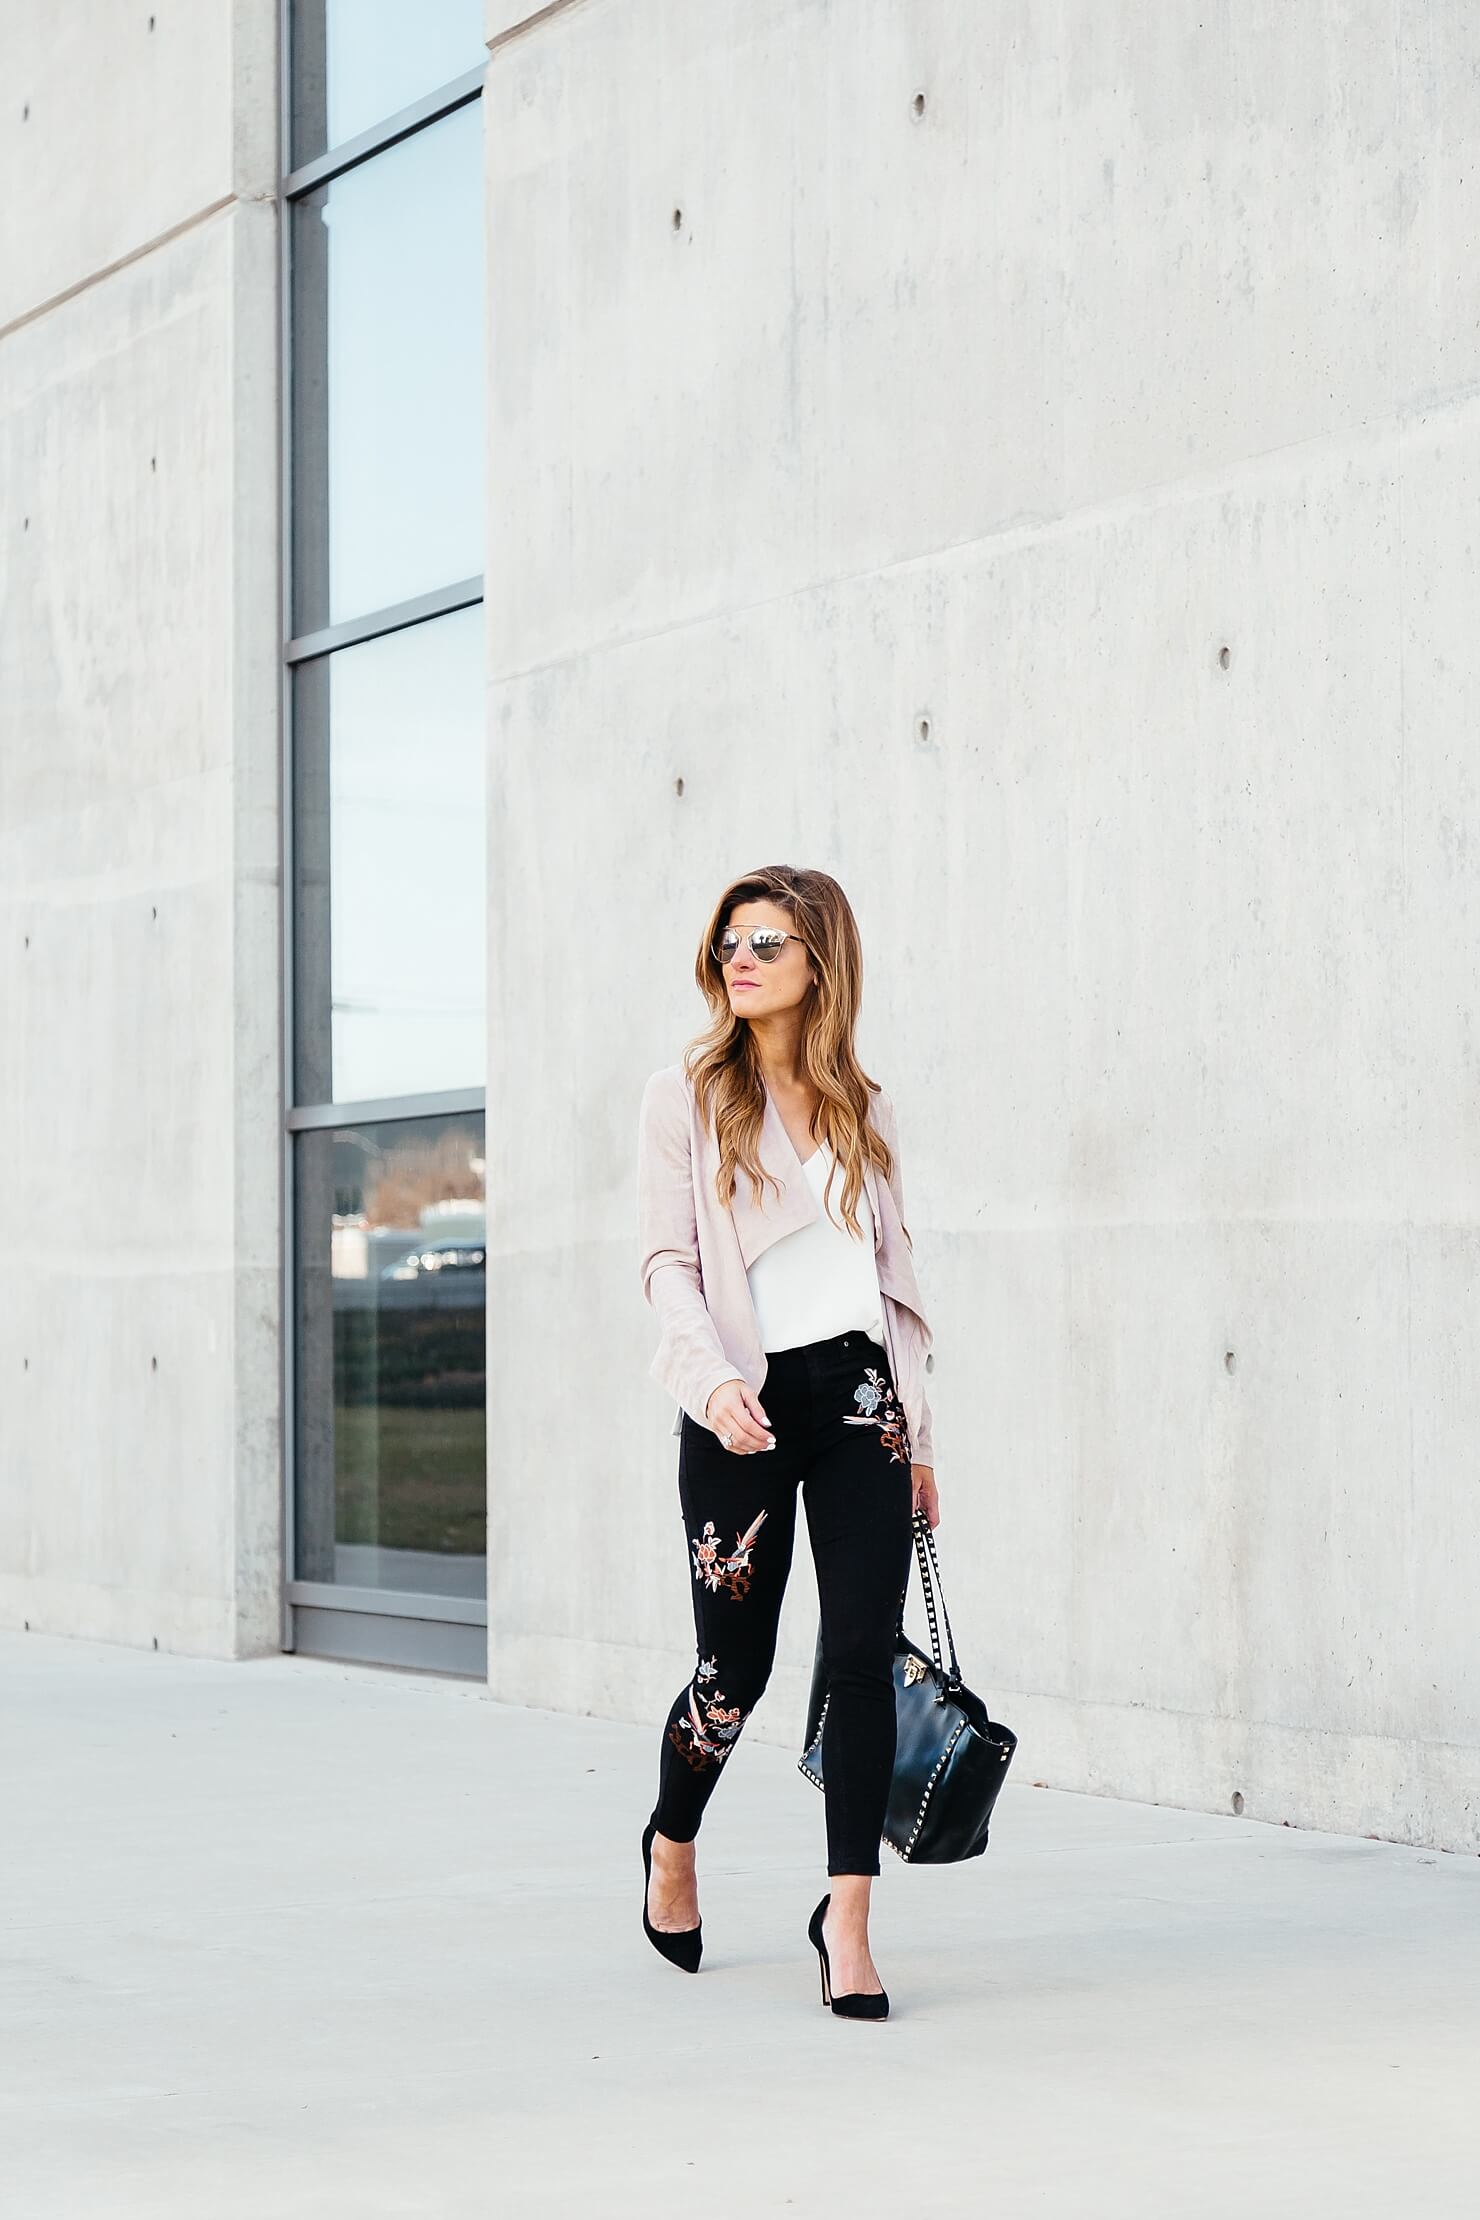 The embroidery trend, topshop embroidered jeans outfit // floral pant outfit // pink jacket outfit ideas 